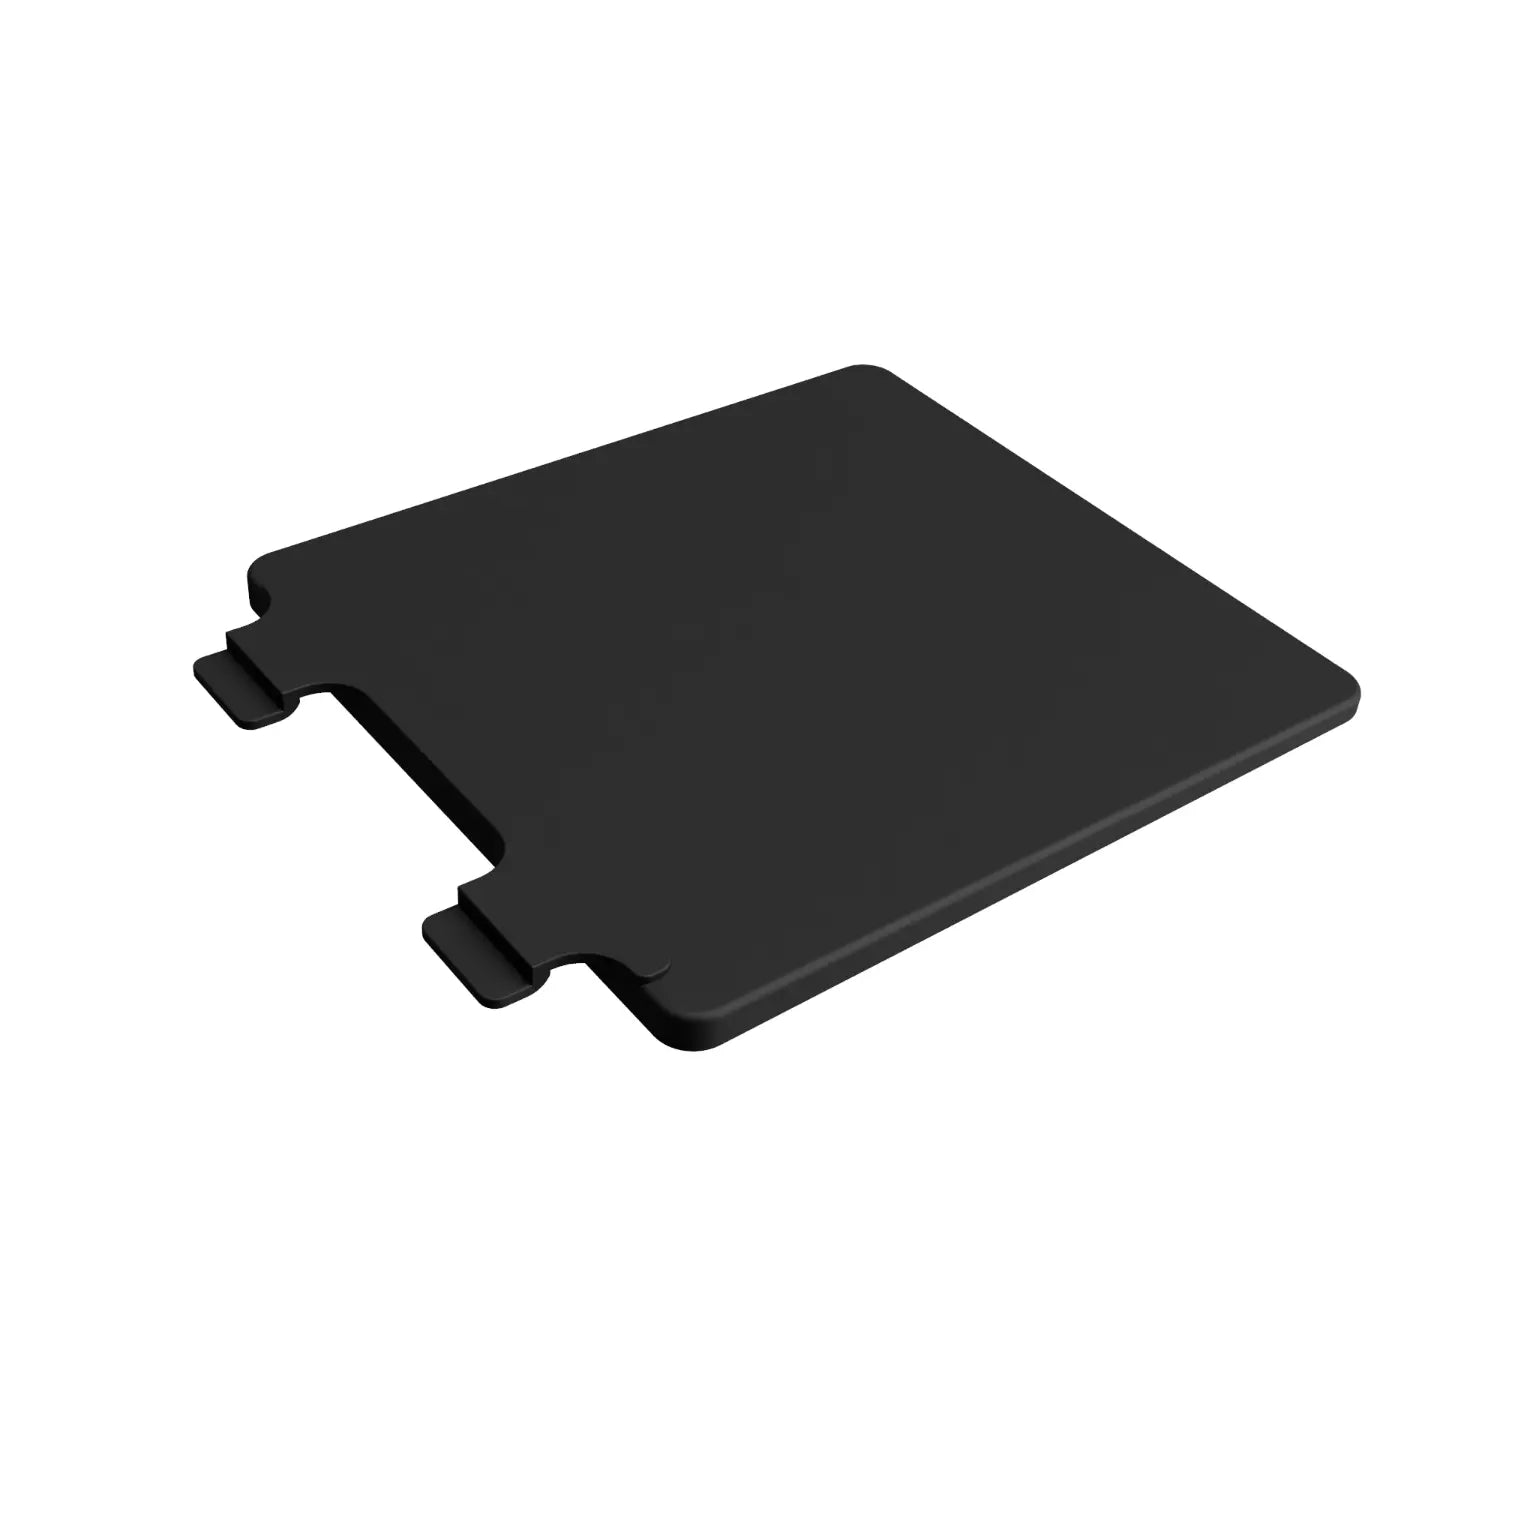 theStand Mouse Pad Extension